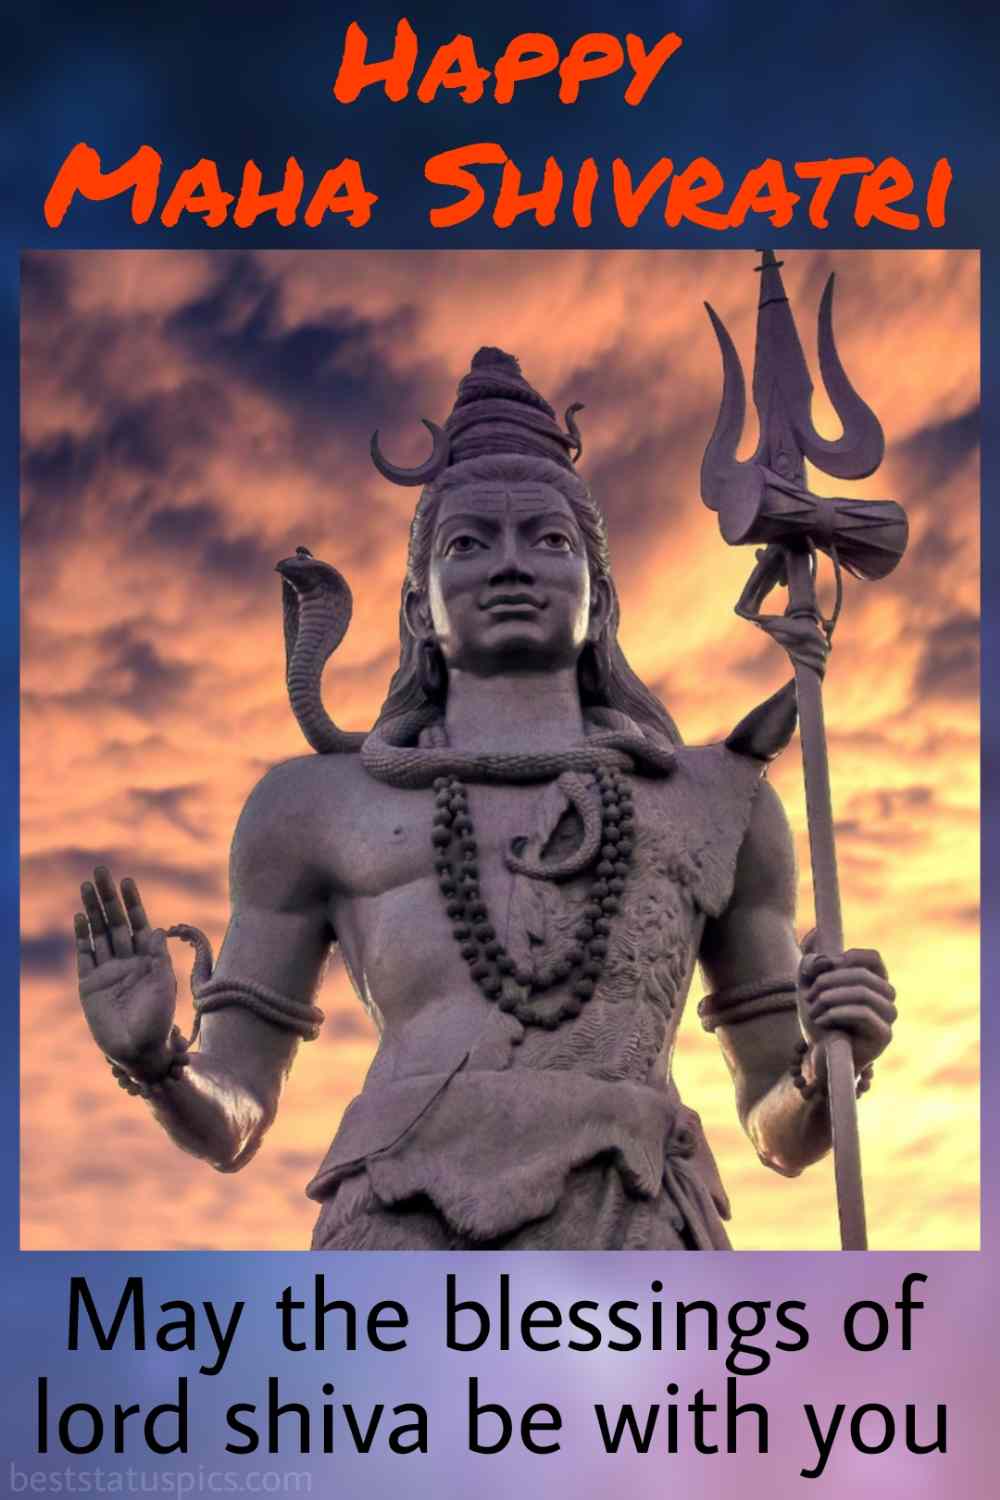 New Happy Maha Shivratri 2022 wishes images HD, photos and greeting cards